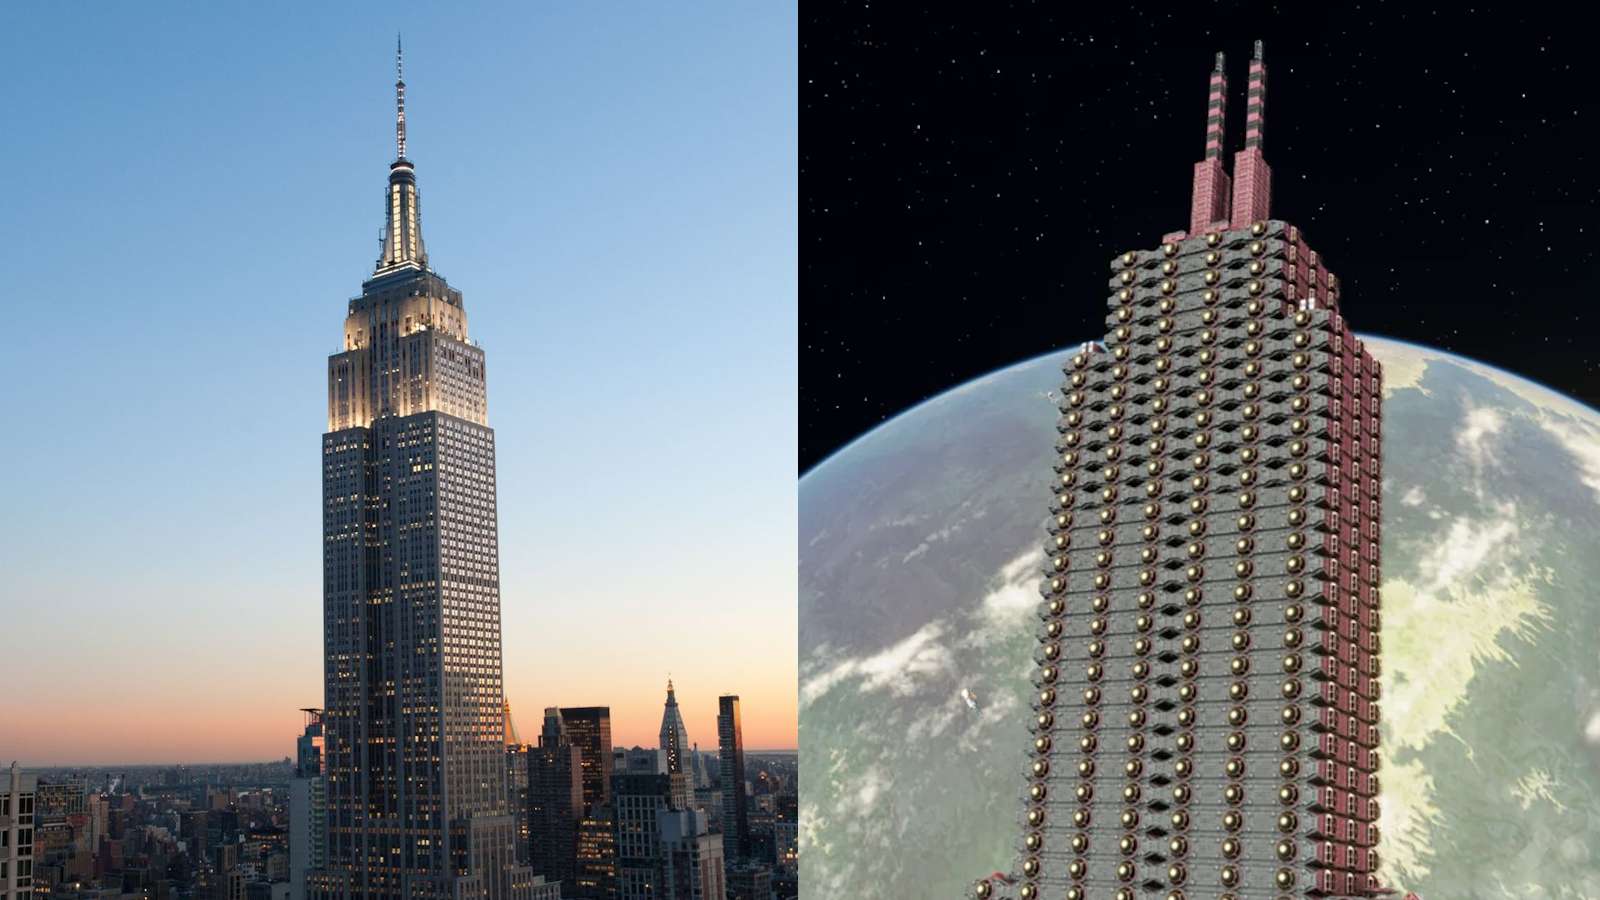 The Empire State Building (left) and the Empire Space Building ship in Starfield (right).